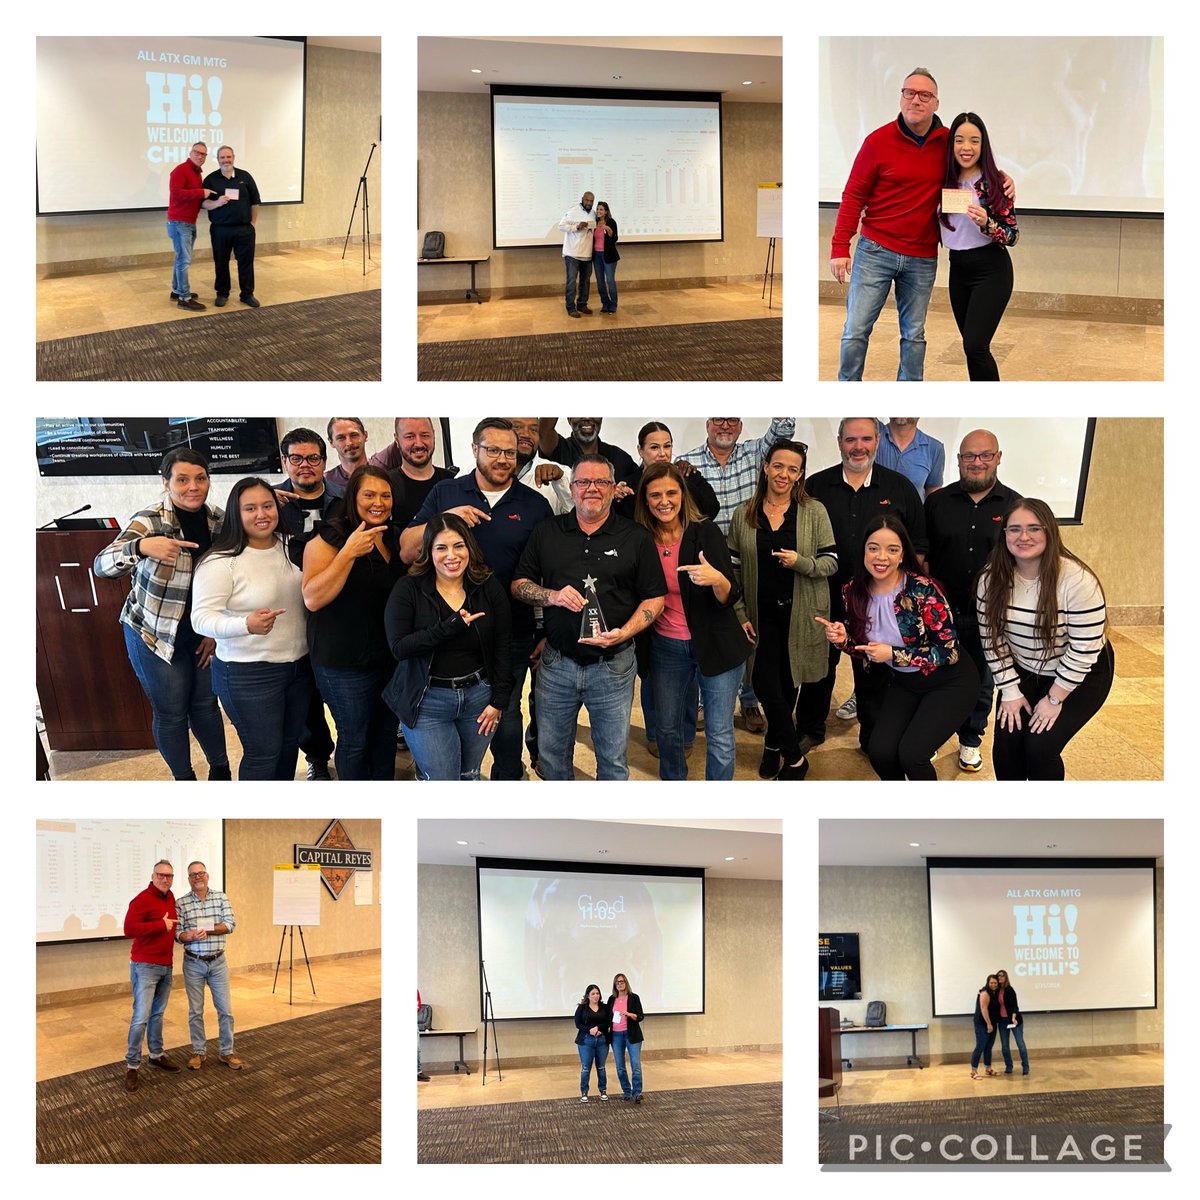 Celebrating Rodney’s 20 years with Chili’s and creating alignment across all GMs in Austin, TX. Ready or not, #DensonDomination has come to town!! #Purpose #STX1 #ChilisLove these teams!!